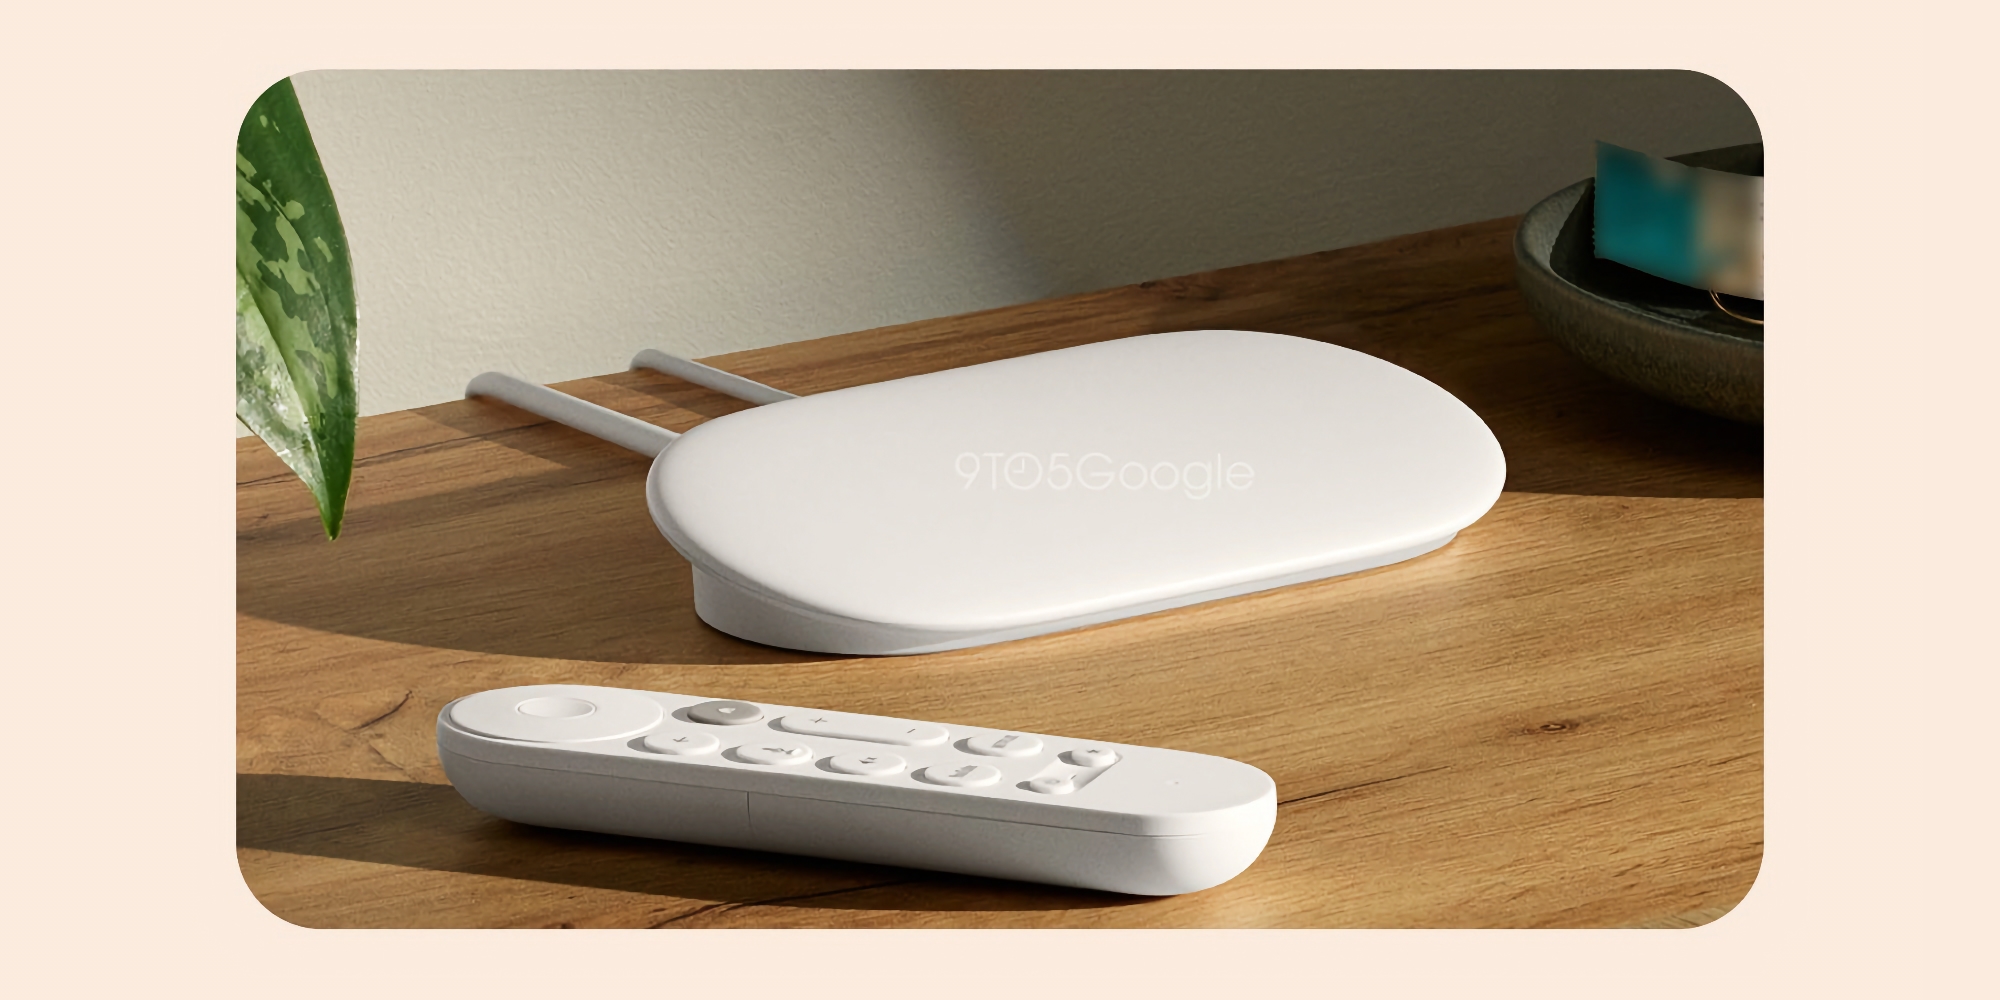 Google is preparing to release the successor to Chromecast with Google TV (4K), here's what the new product will look like